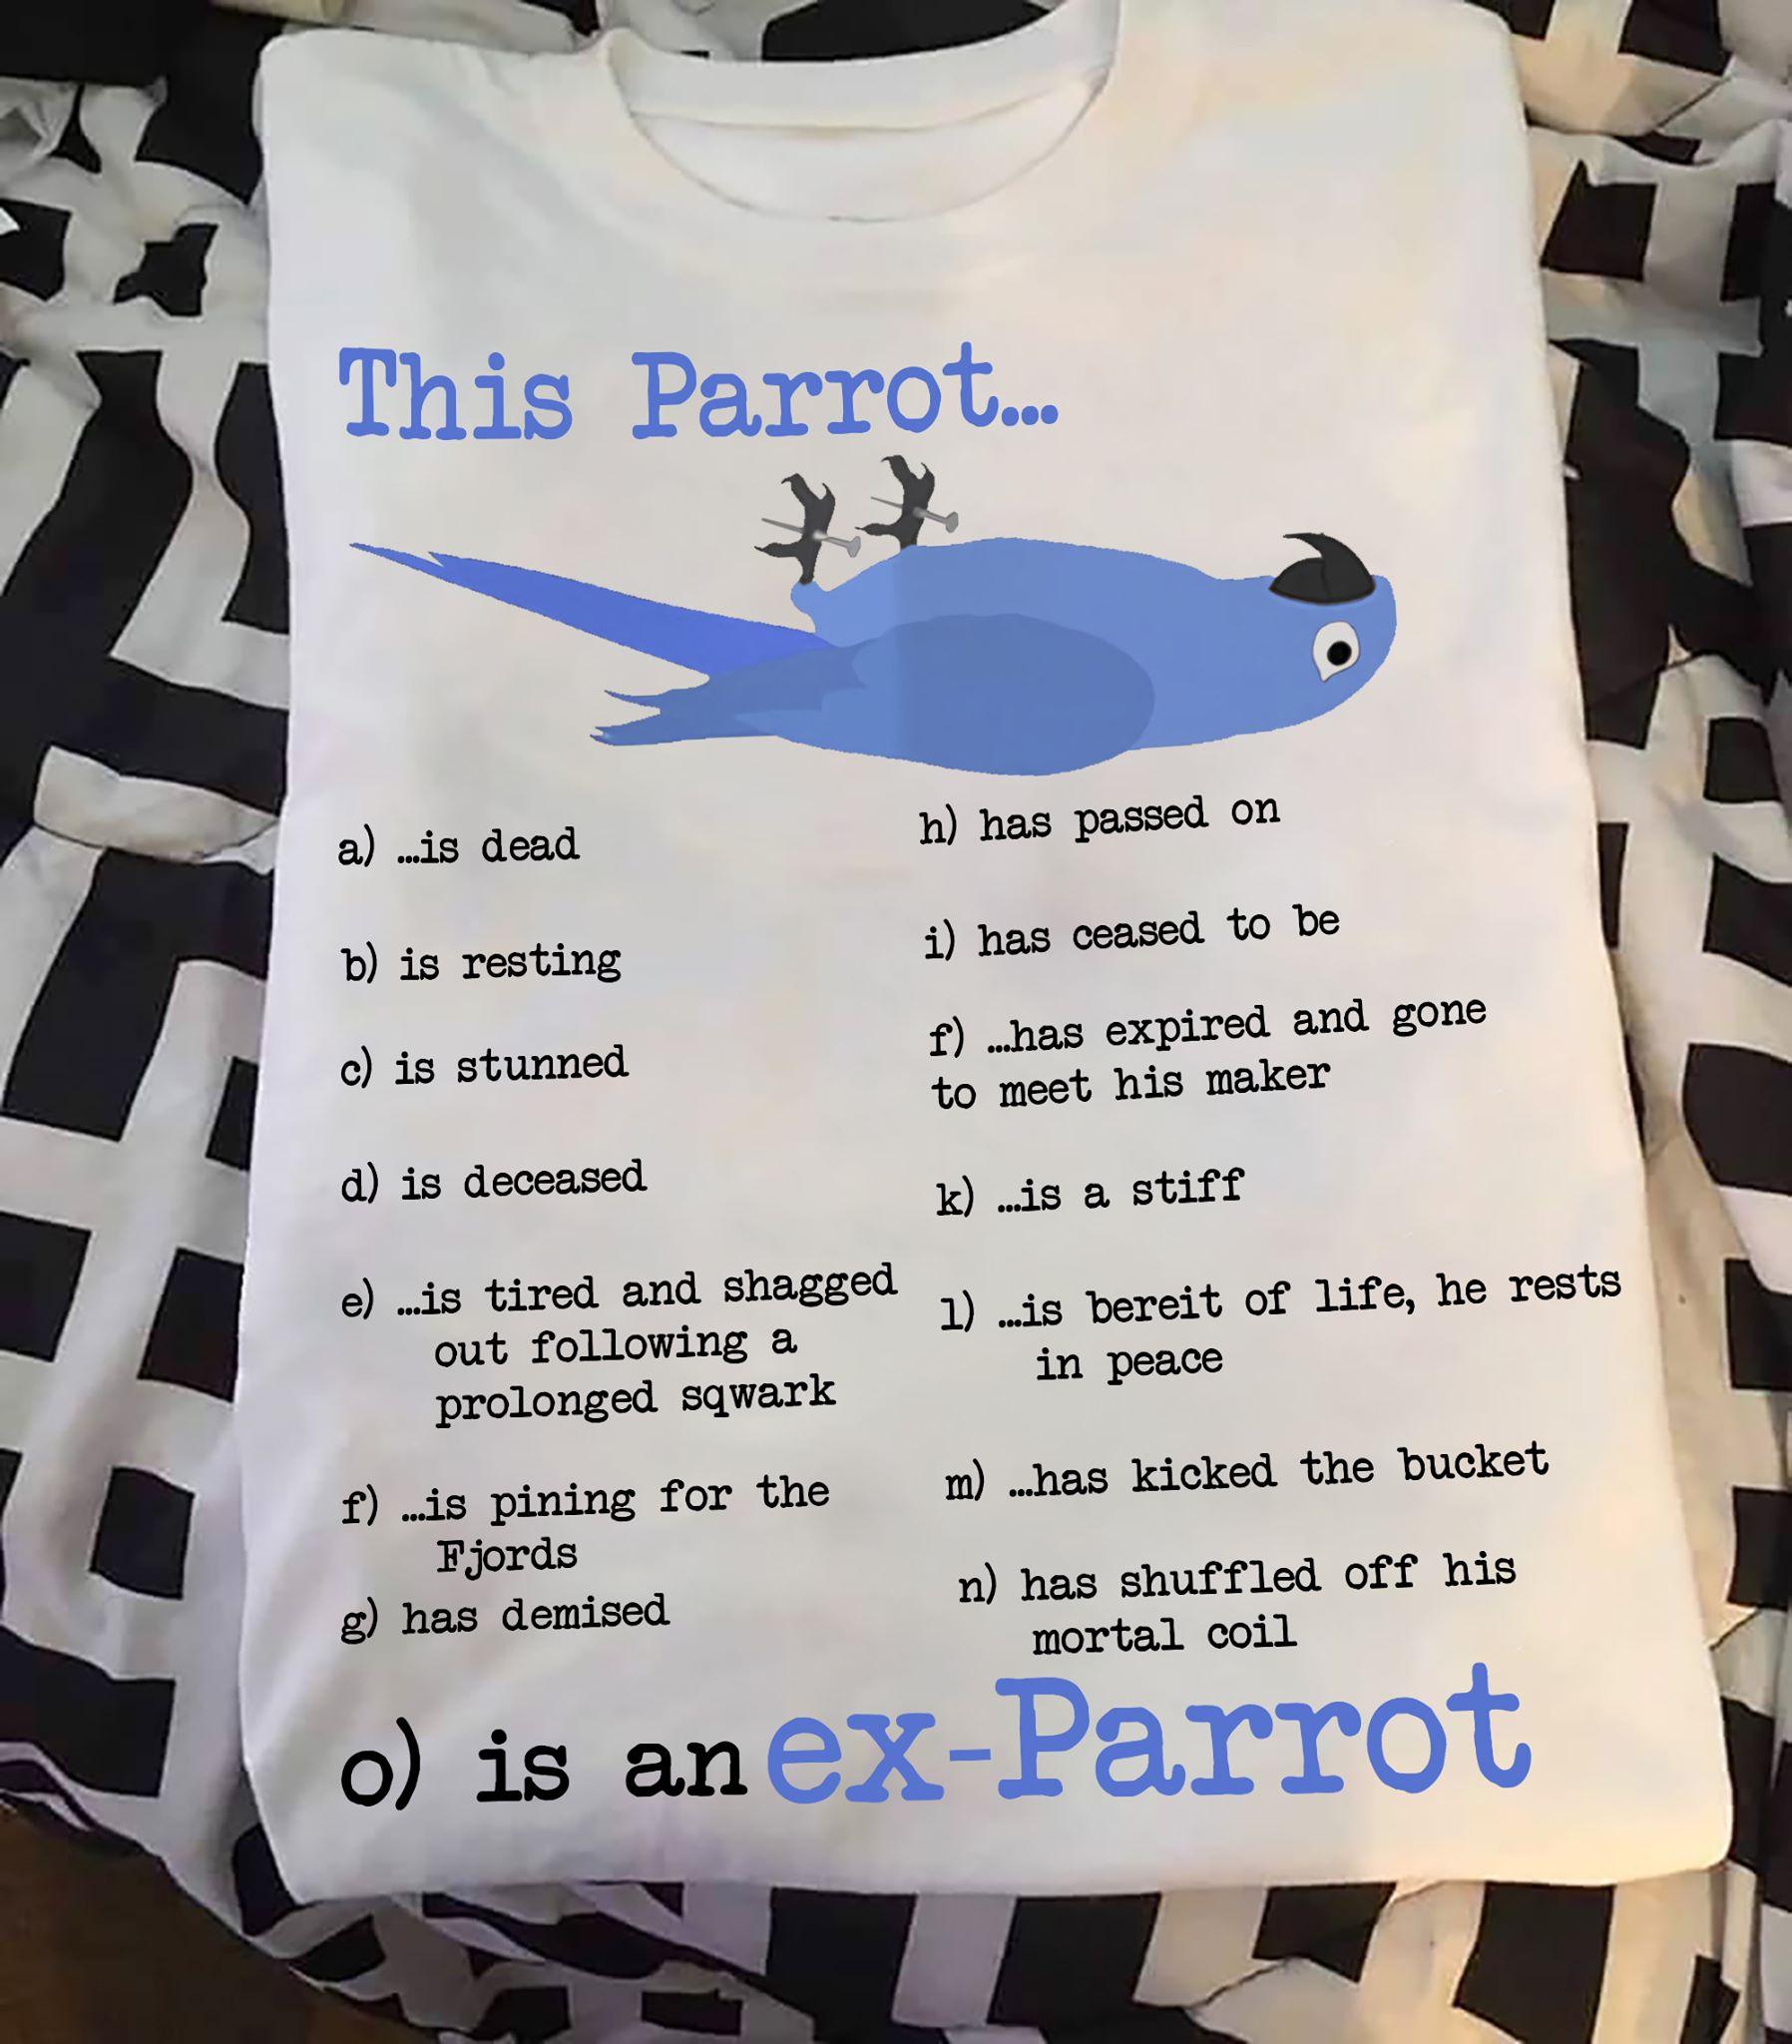 This parrot is an ex-parrot - Blue parrot graphic T-shirt, gift for parrot lover